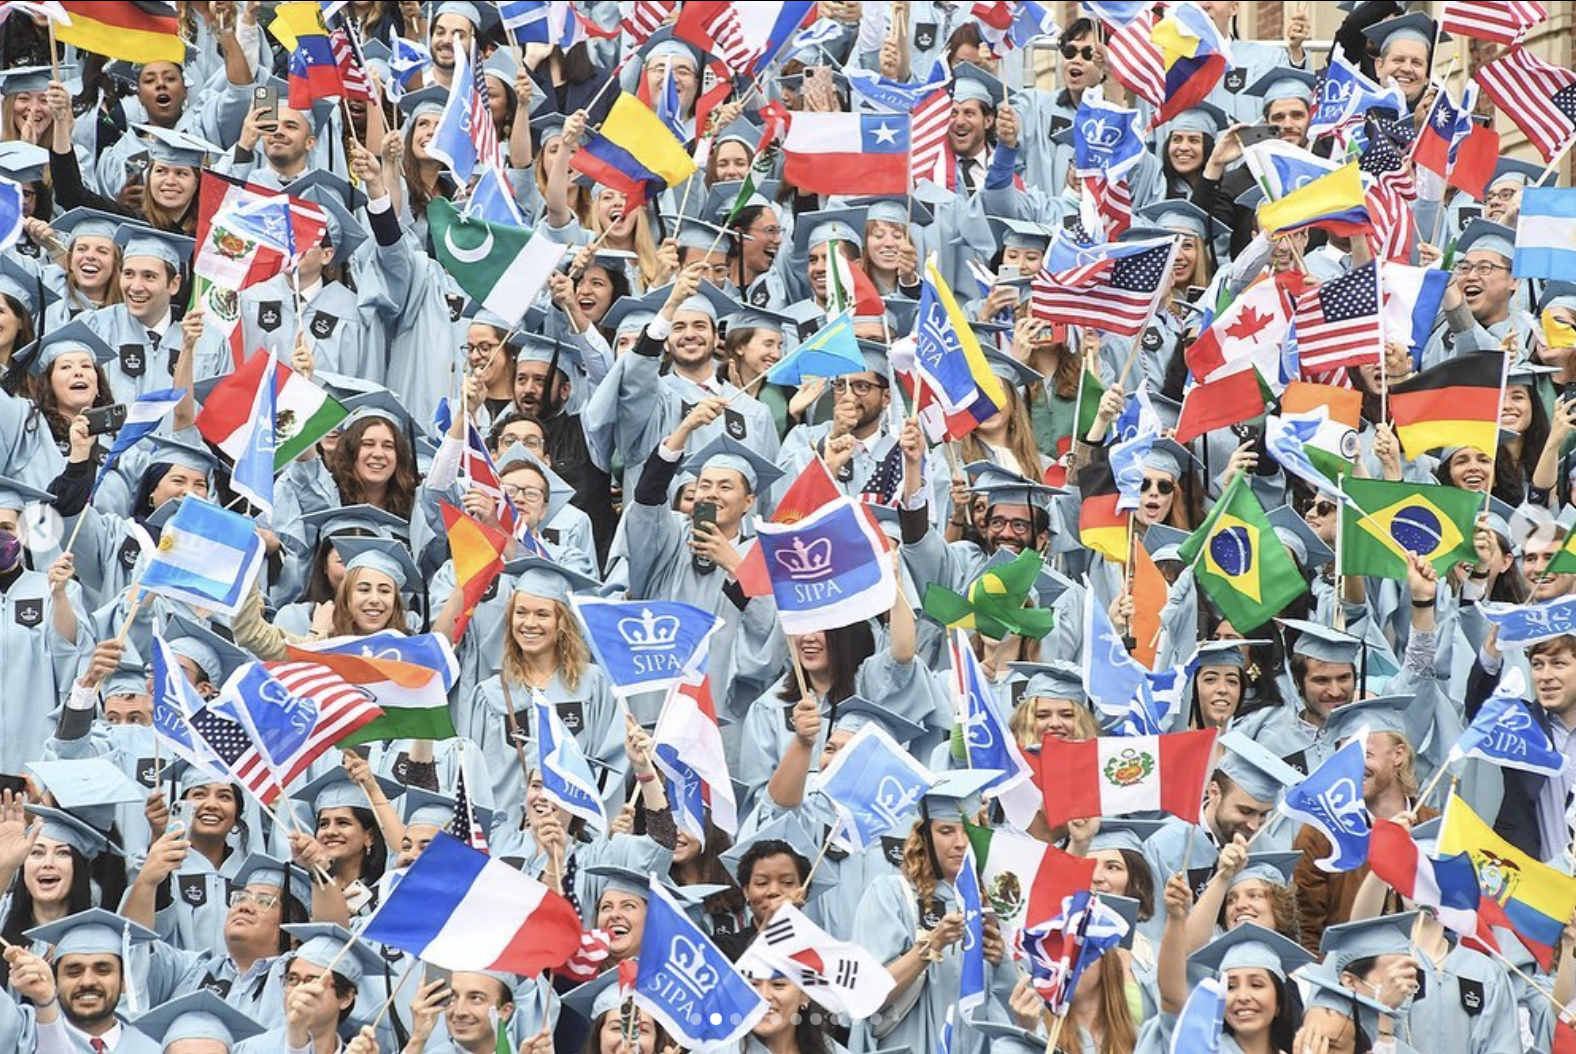 Students at Columbia Convocation